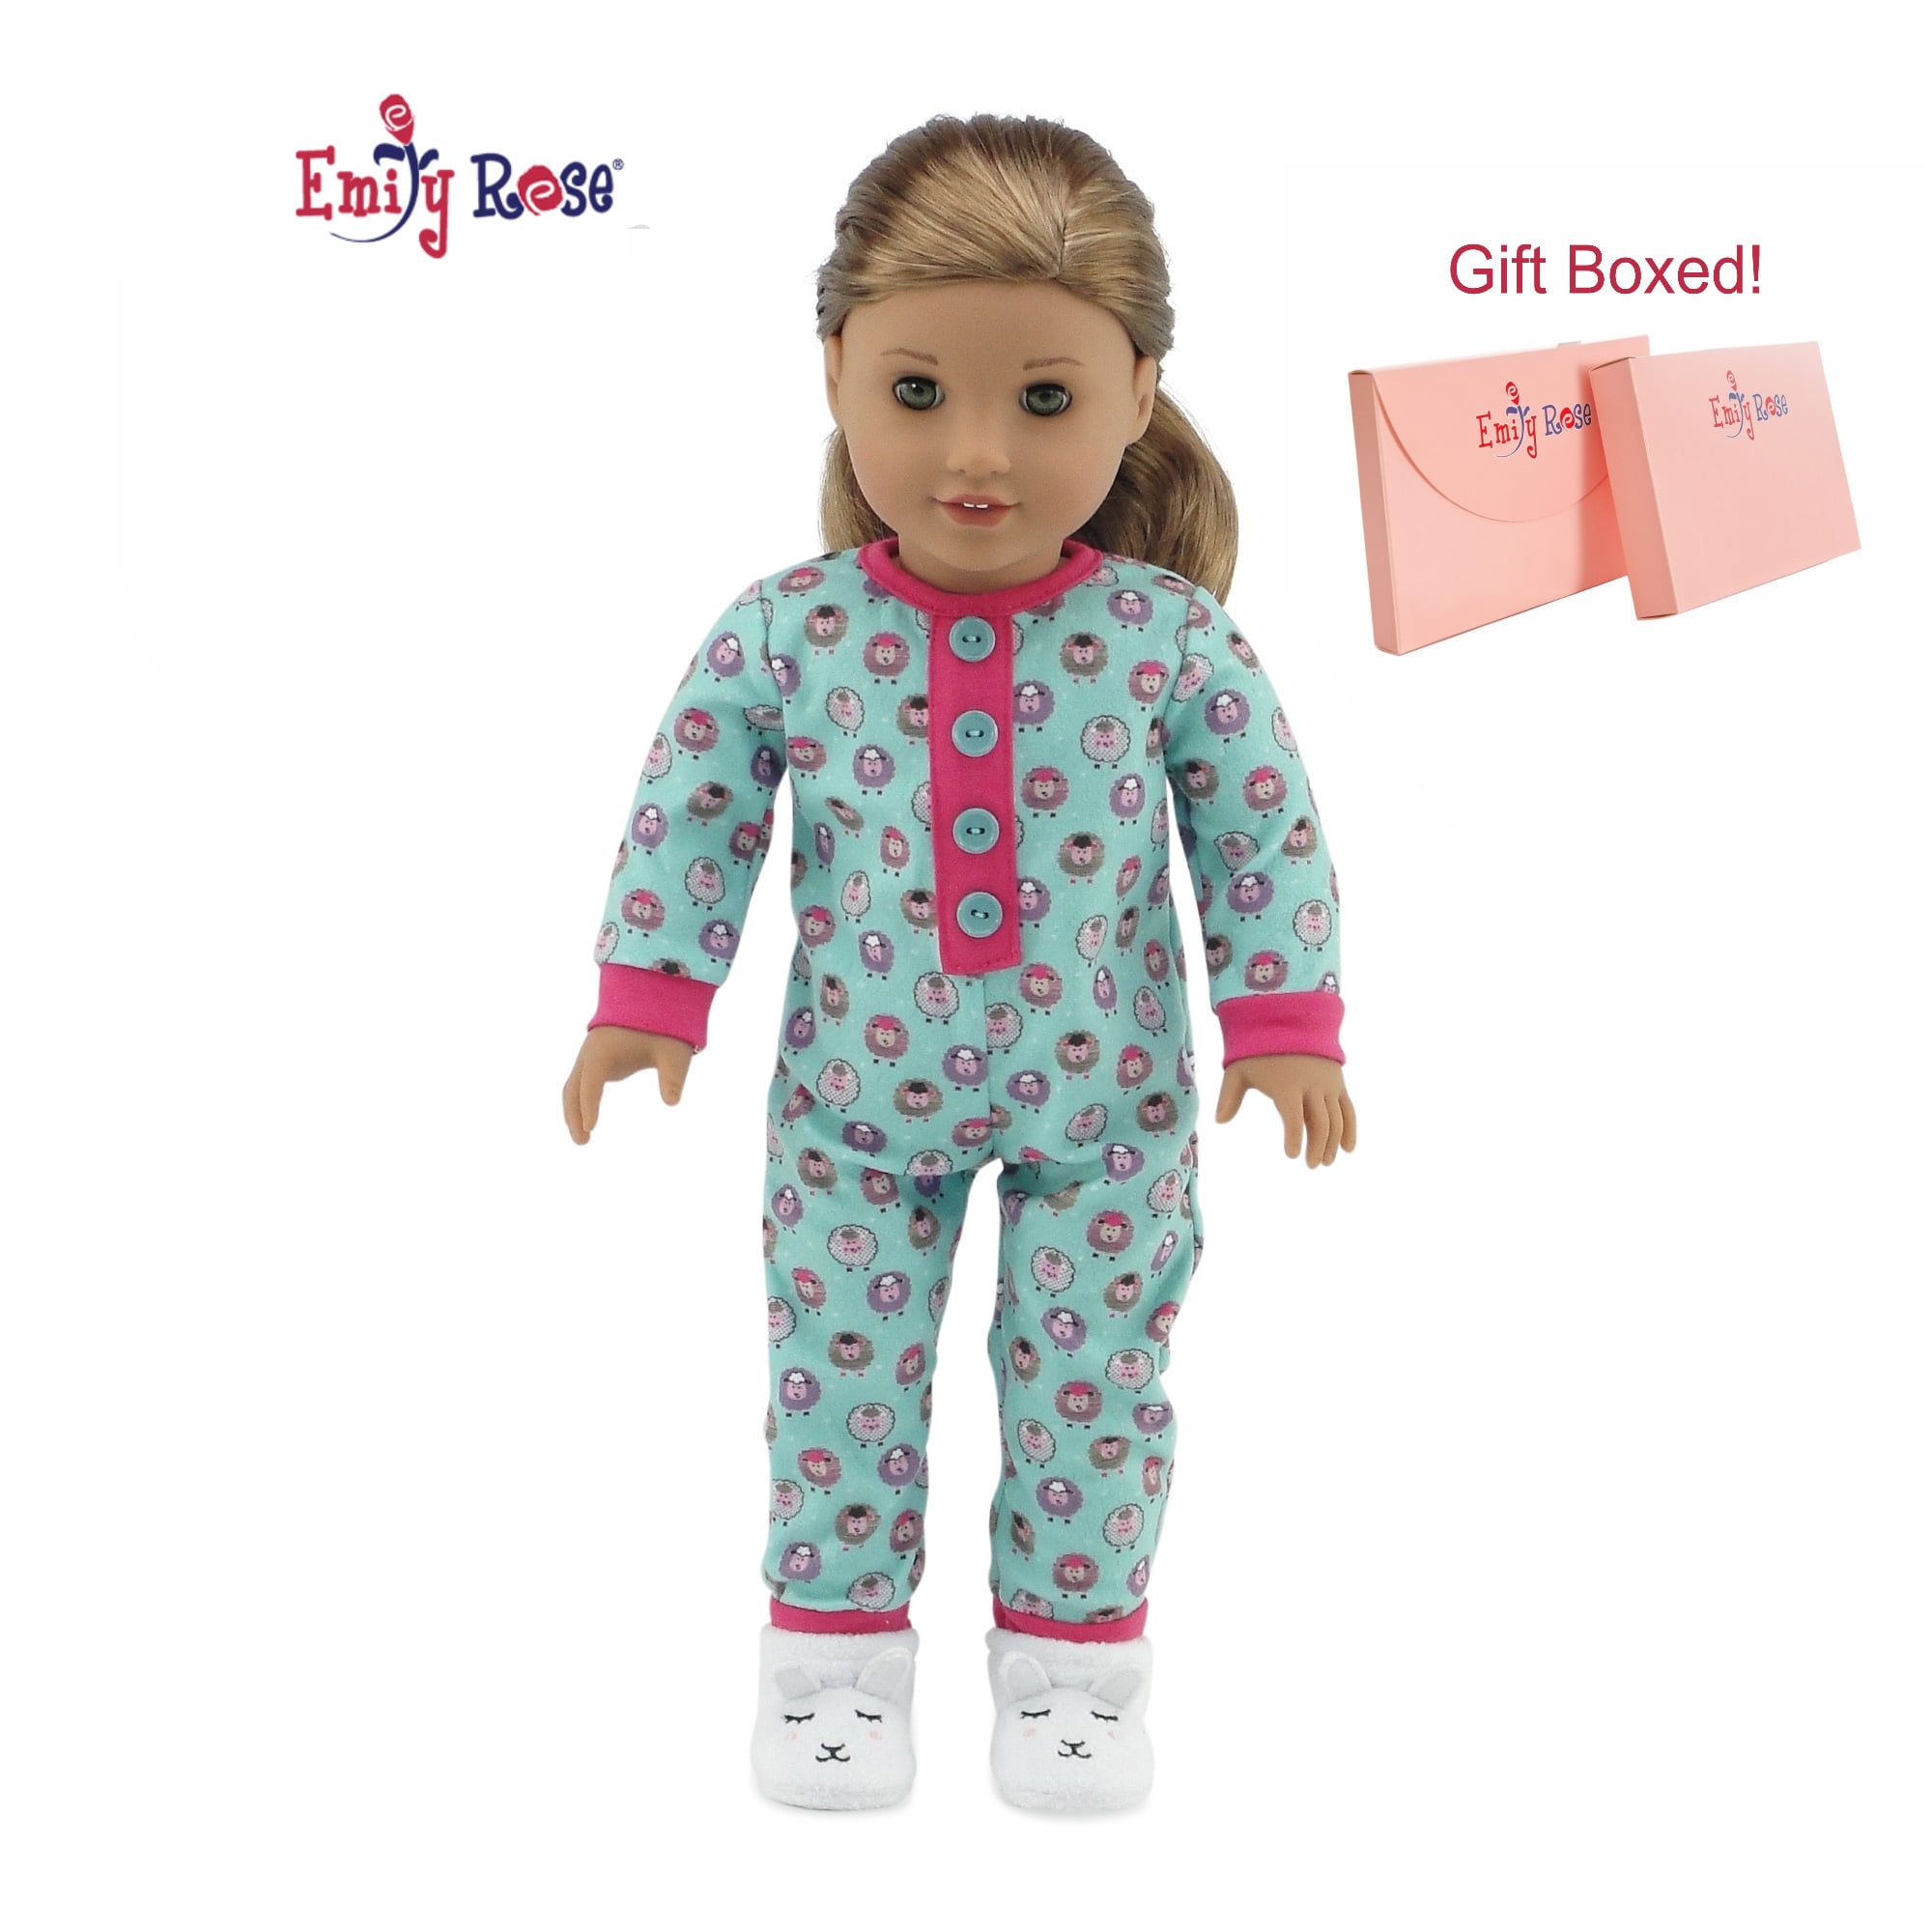 Flowered Campers Pajamas for 18" Doll Clothes American Girl 